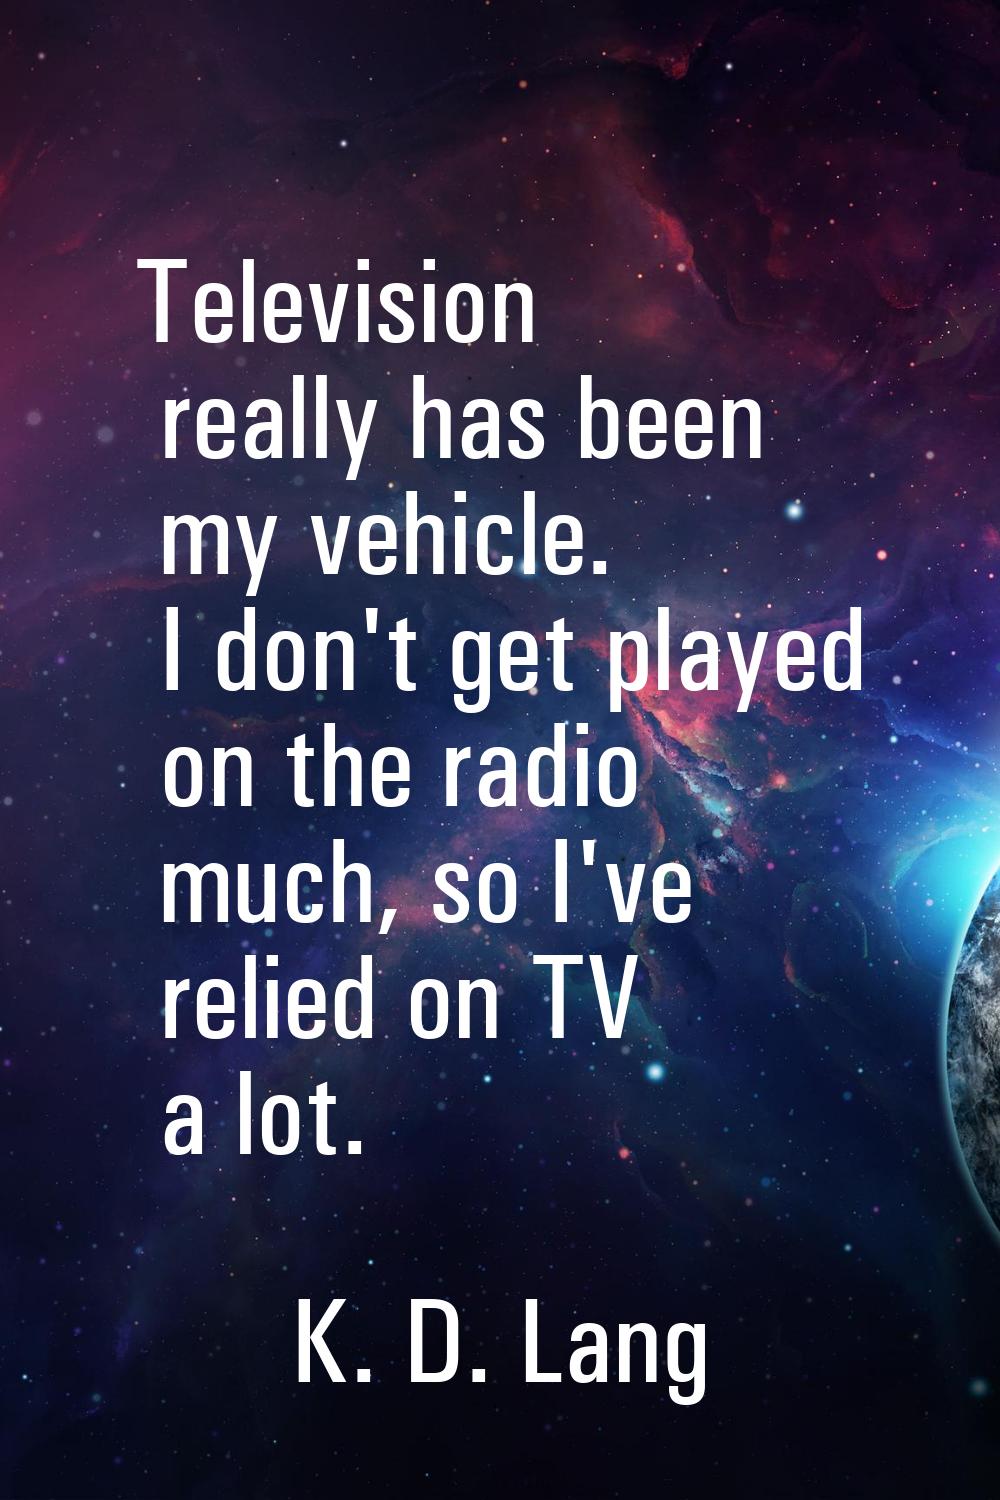 Television really has been my vehicle. I don't get played on the radio much, so I've relied on TV a